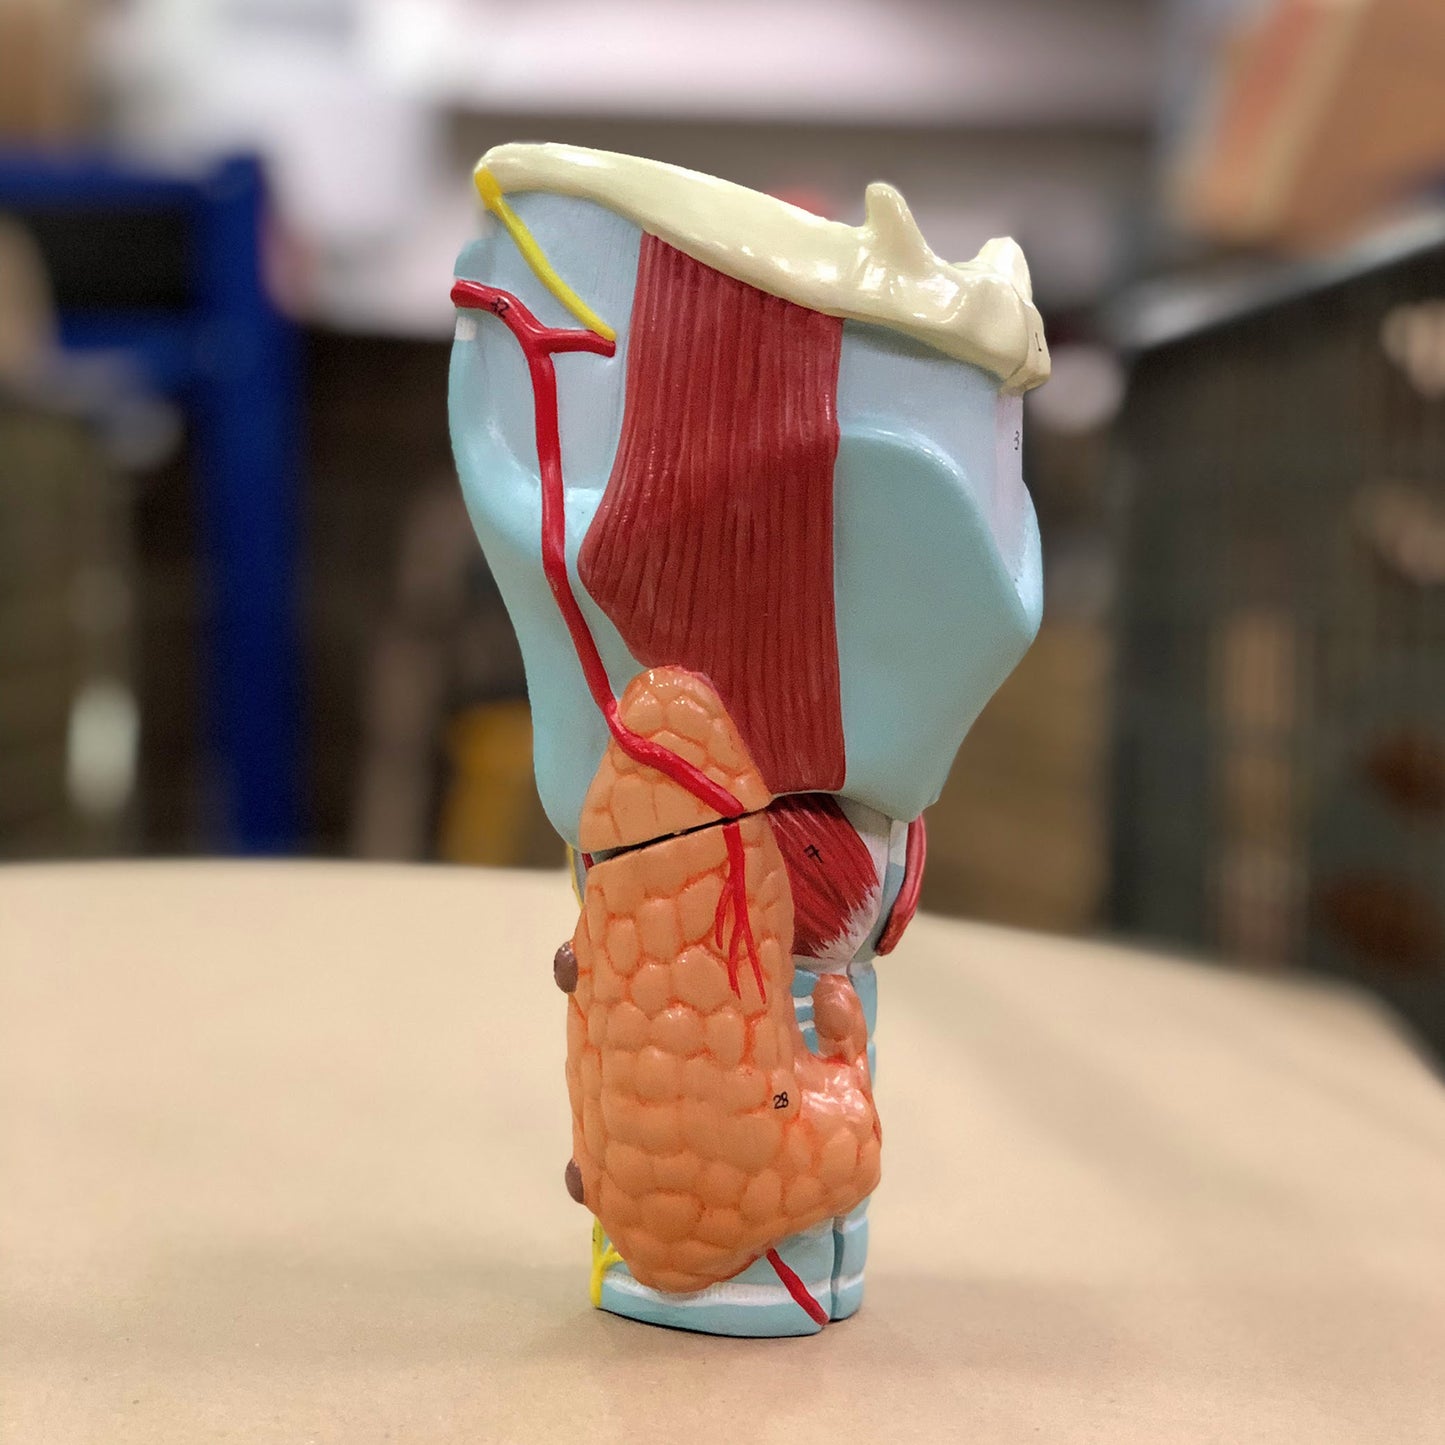 Enlarged larynx model with vocal folds and several other tissues. Can be separated into 5 parts